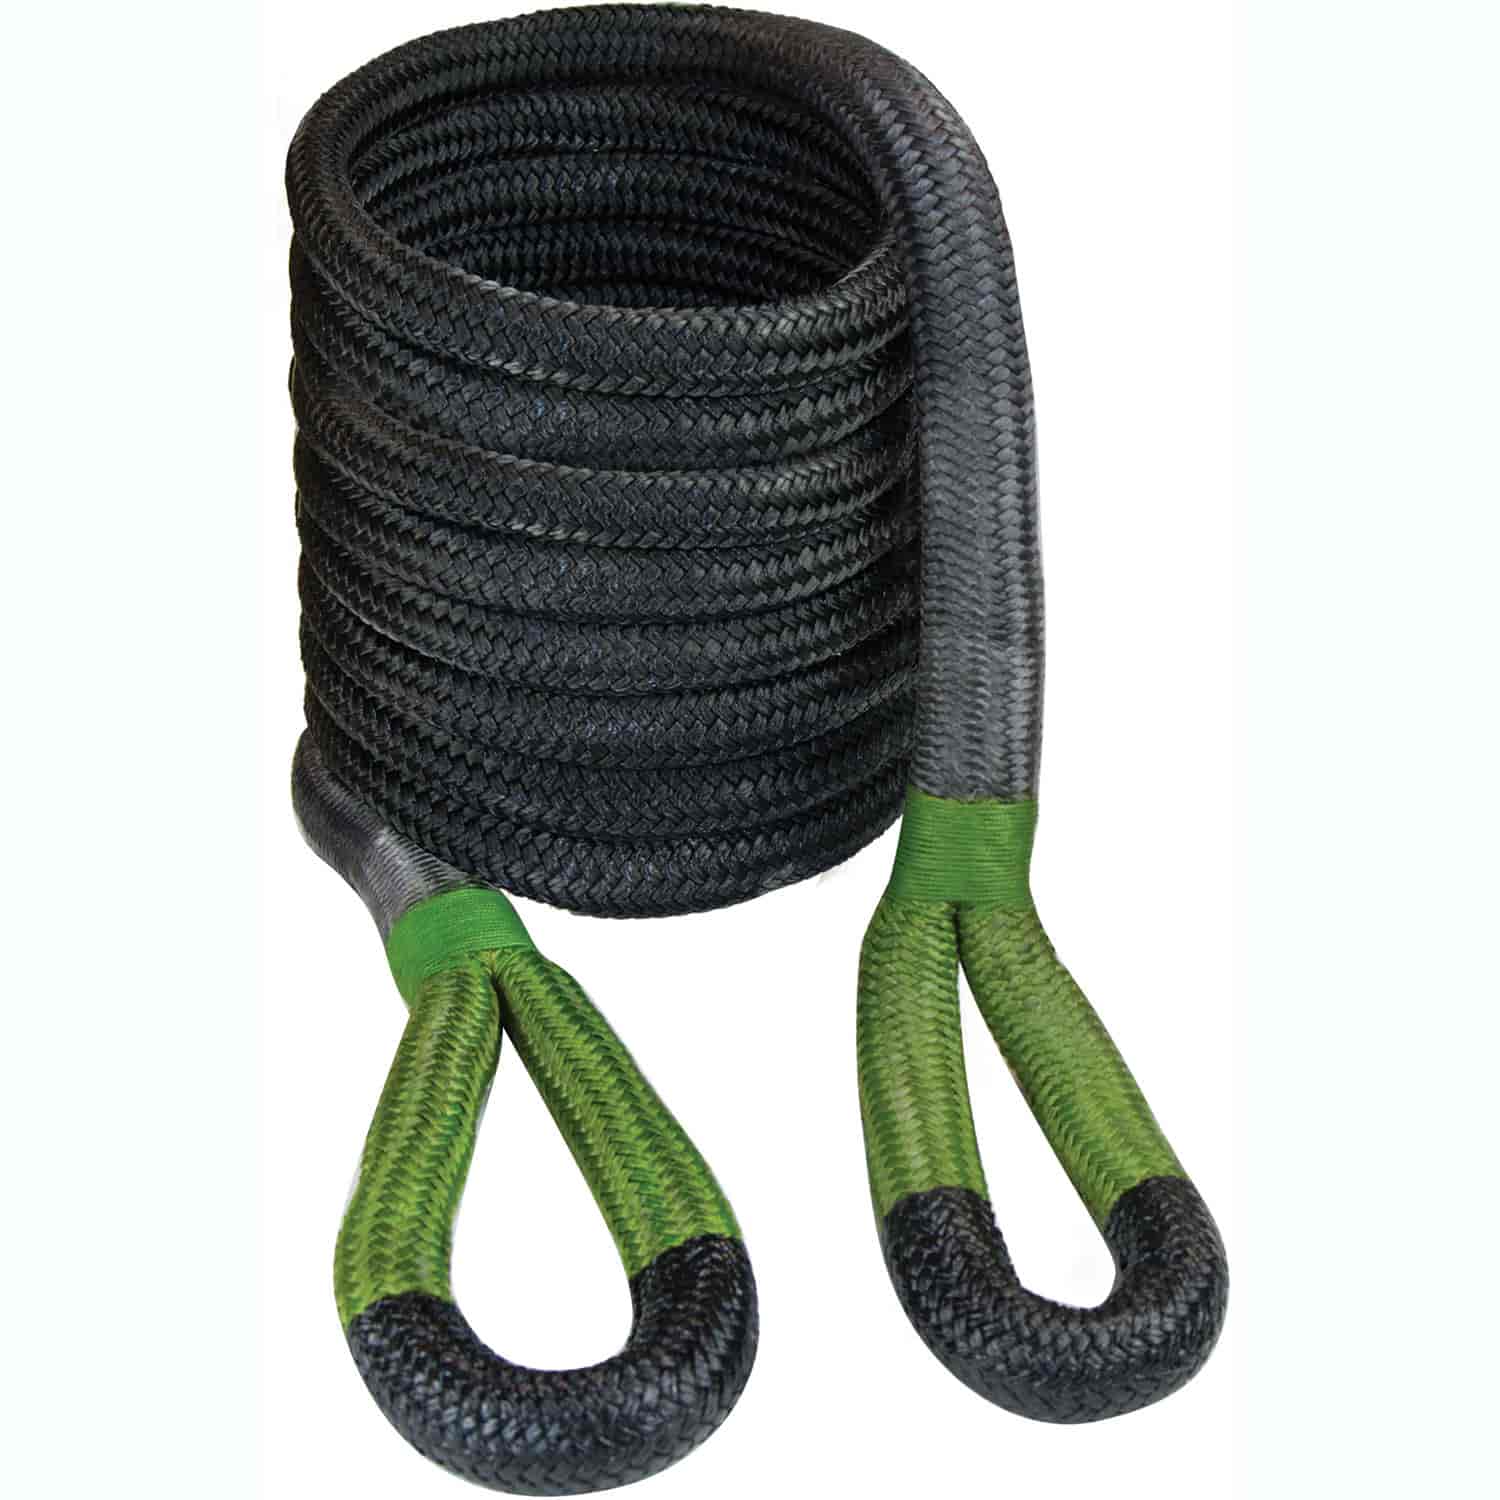 Recovery Rope 1-1/2" X 30' Black Rope with Green Eyes